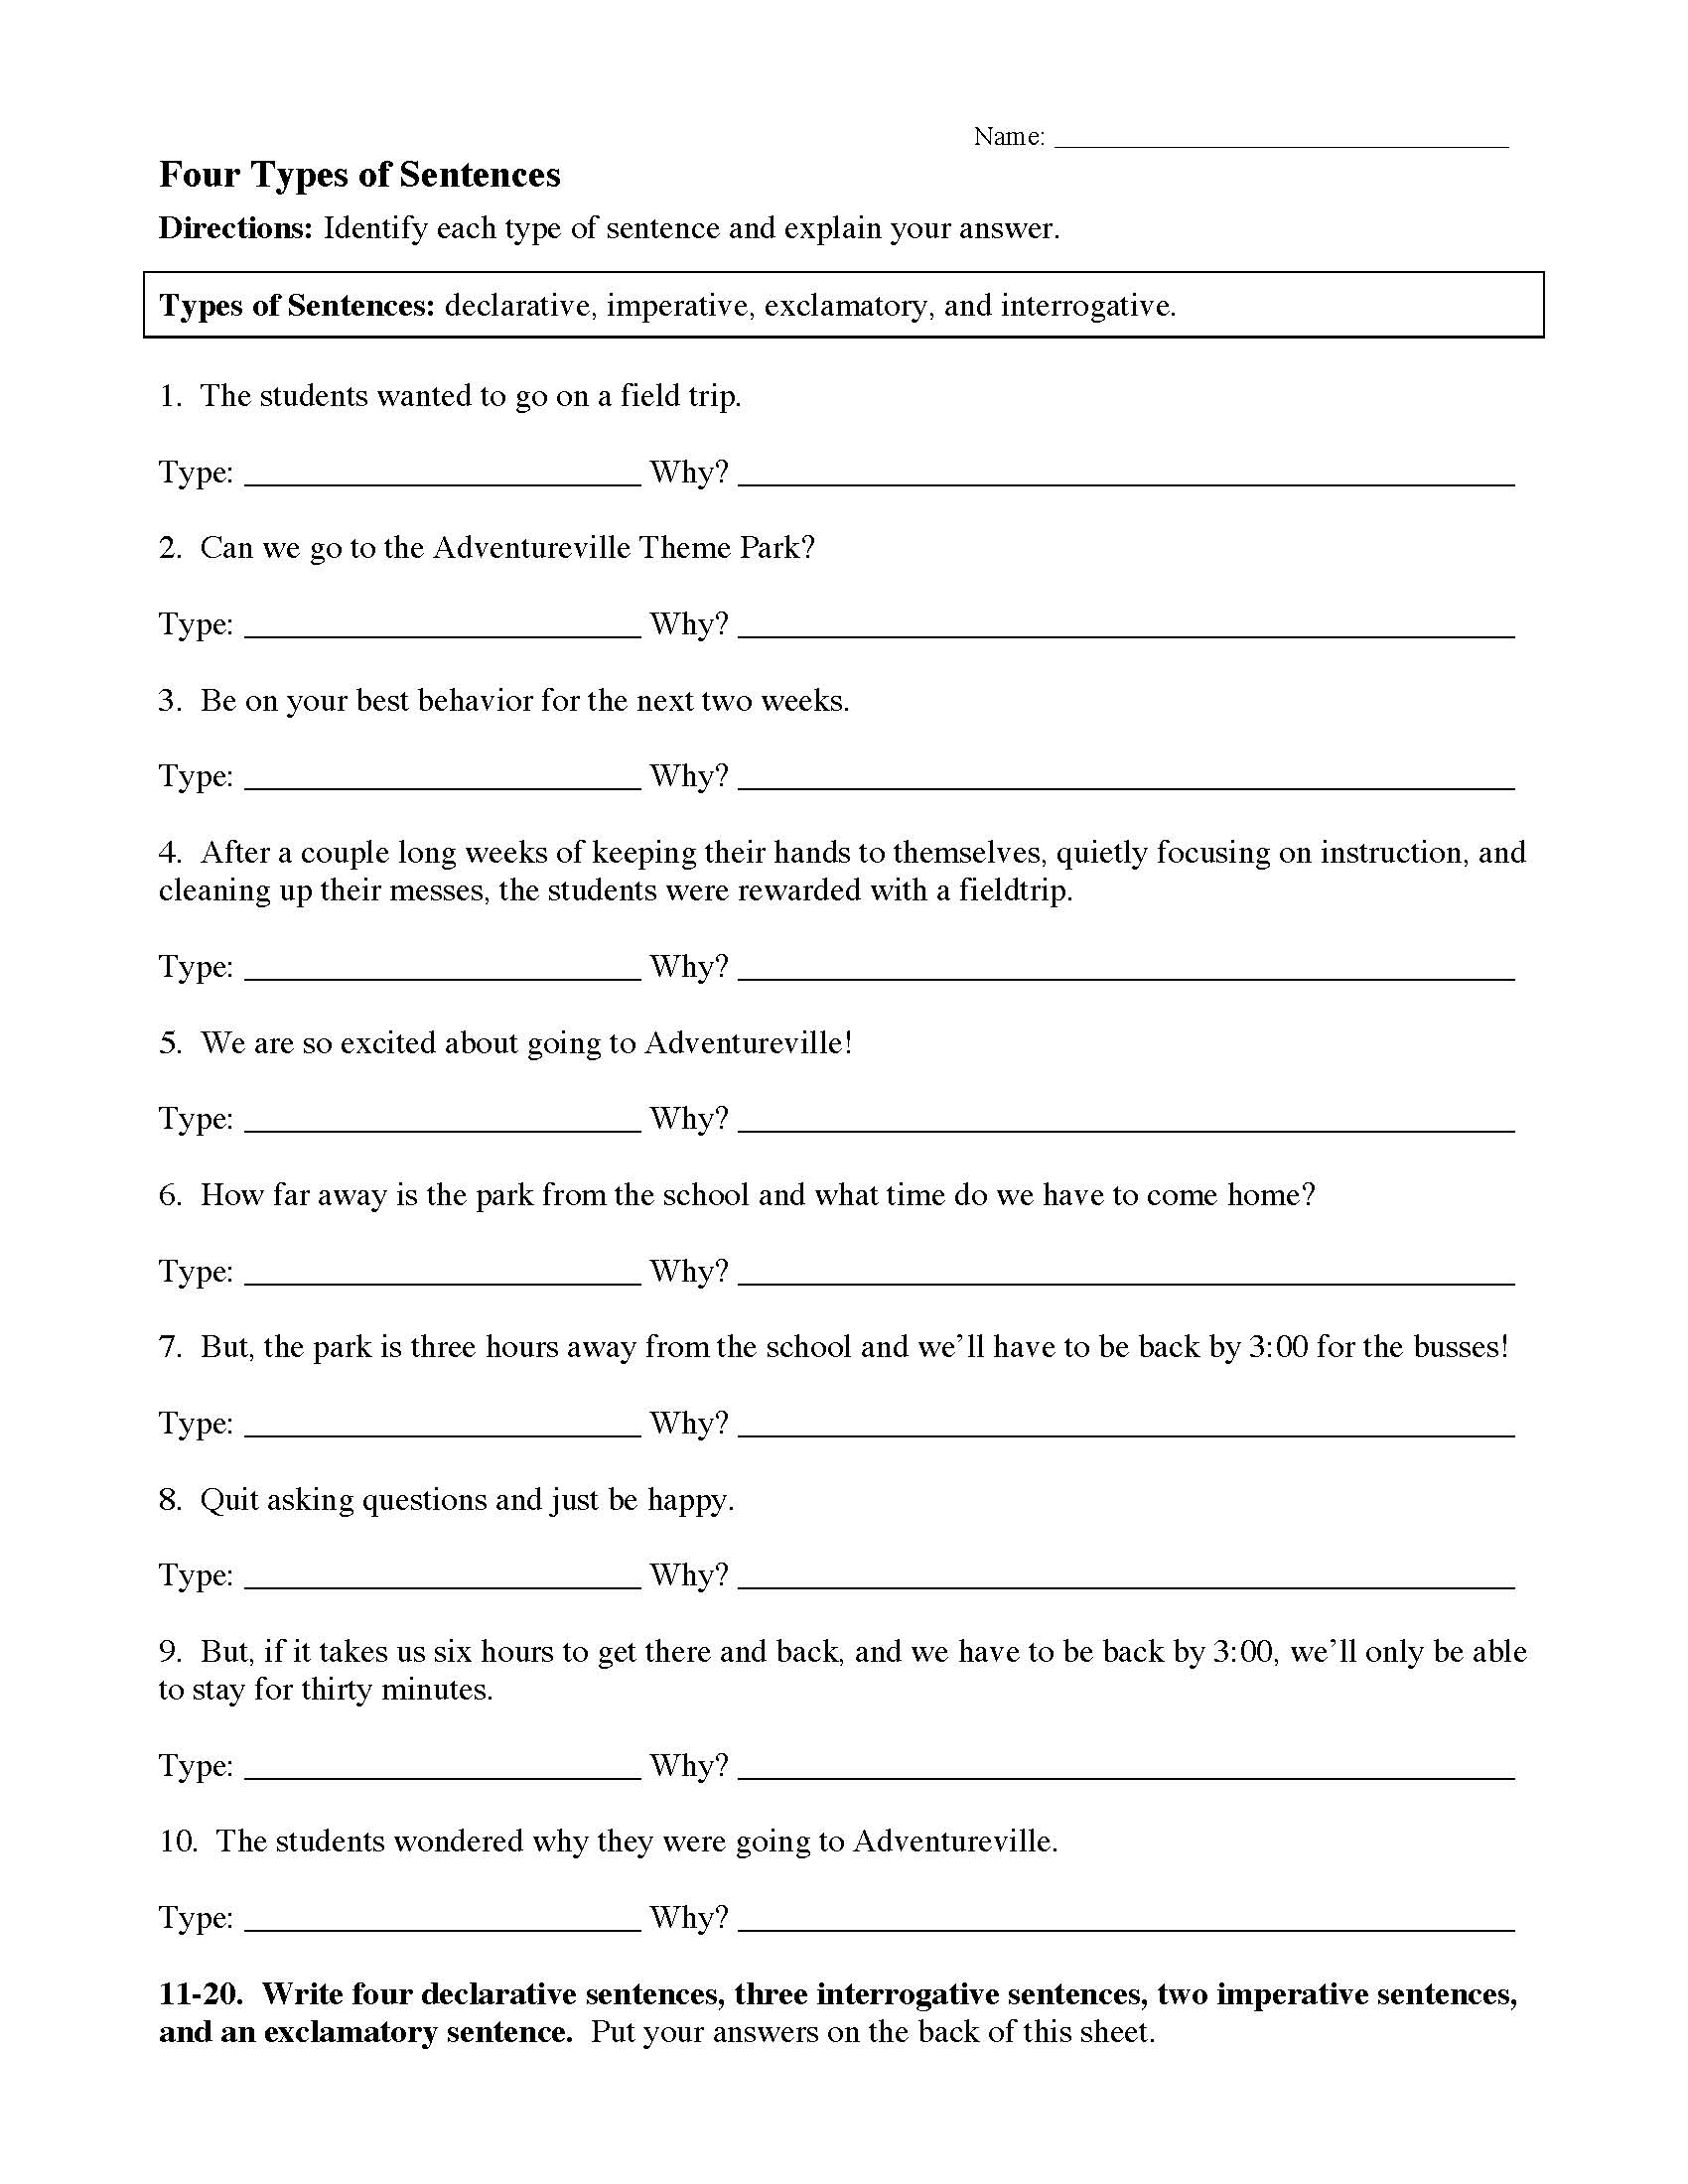 what-kind-of-sentence-types-of-sentences-worksheet-1-identify-the